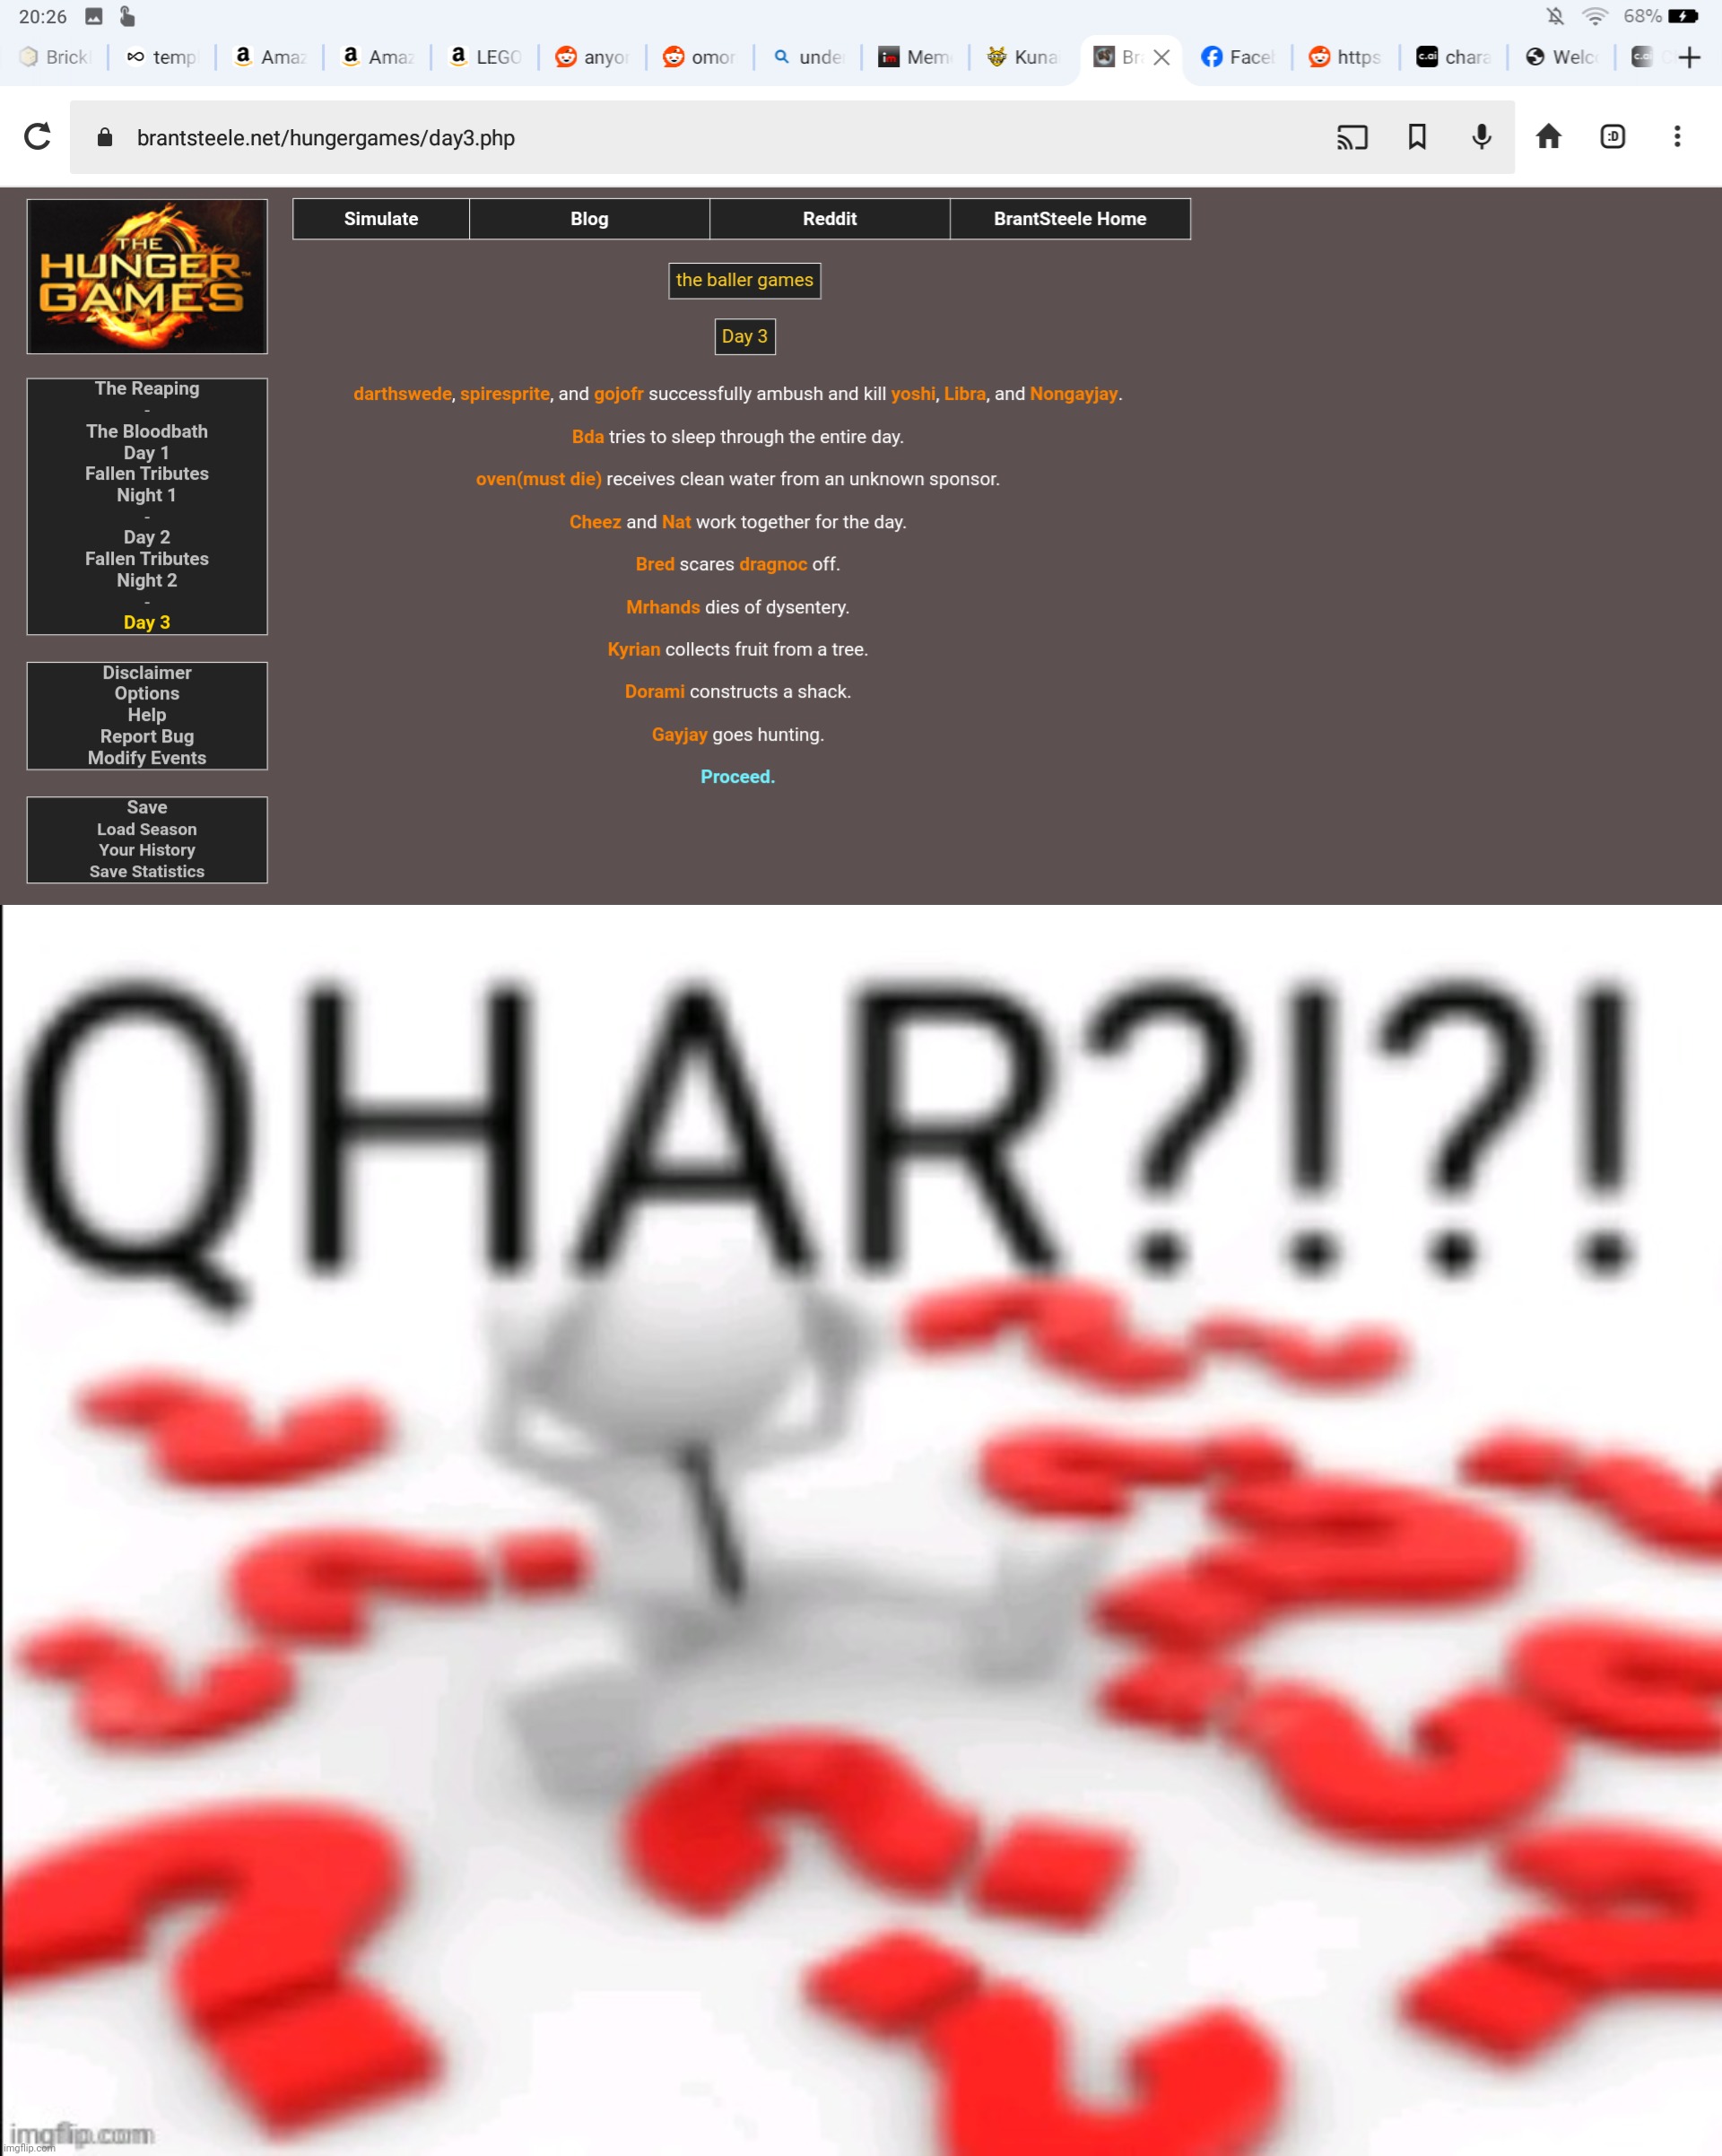 hunger games are paused,why would my teammate murder me xd | image tagged in qhar | made w/ Imgflip meme maker